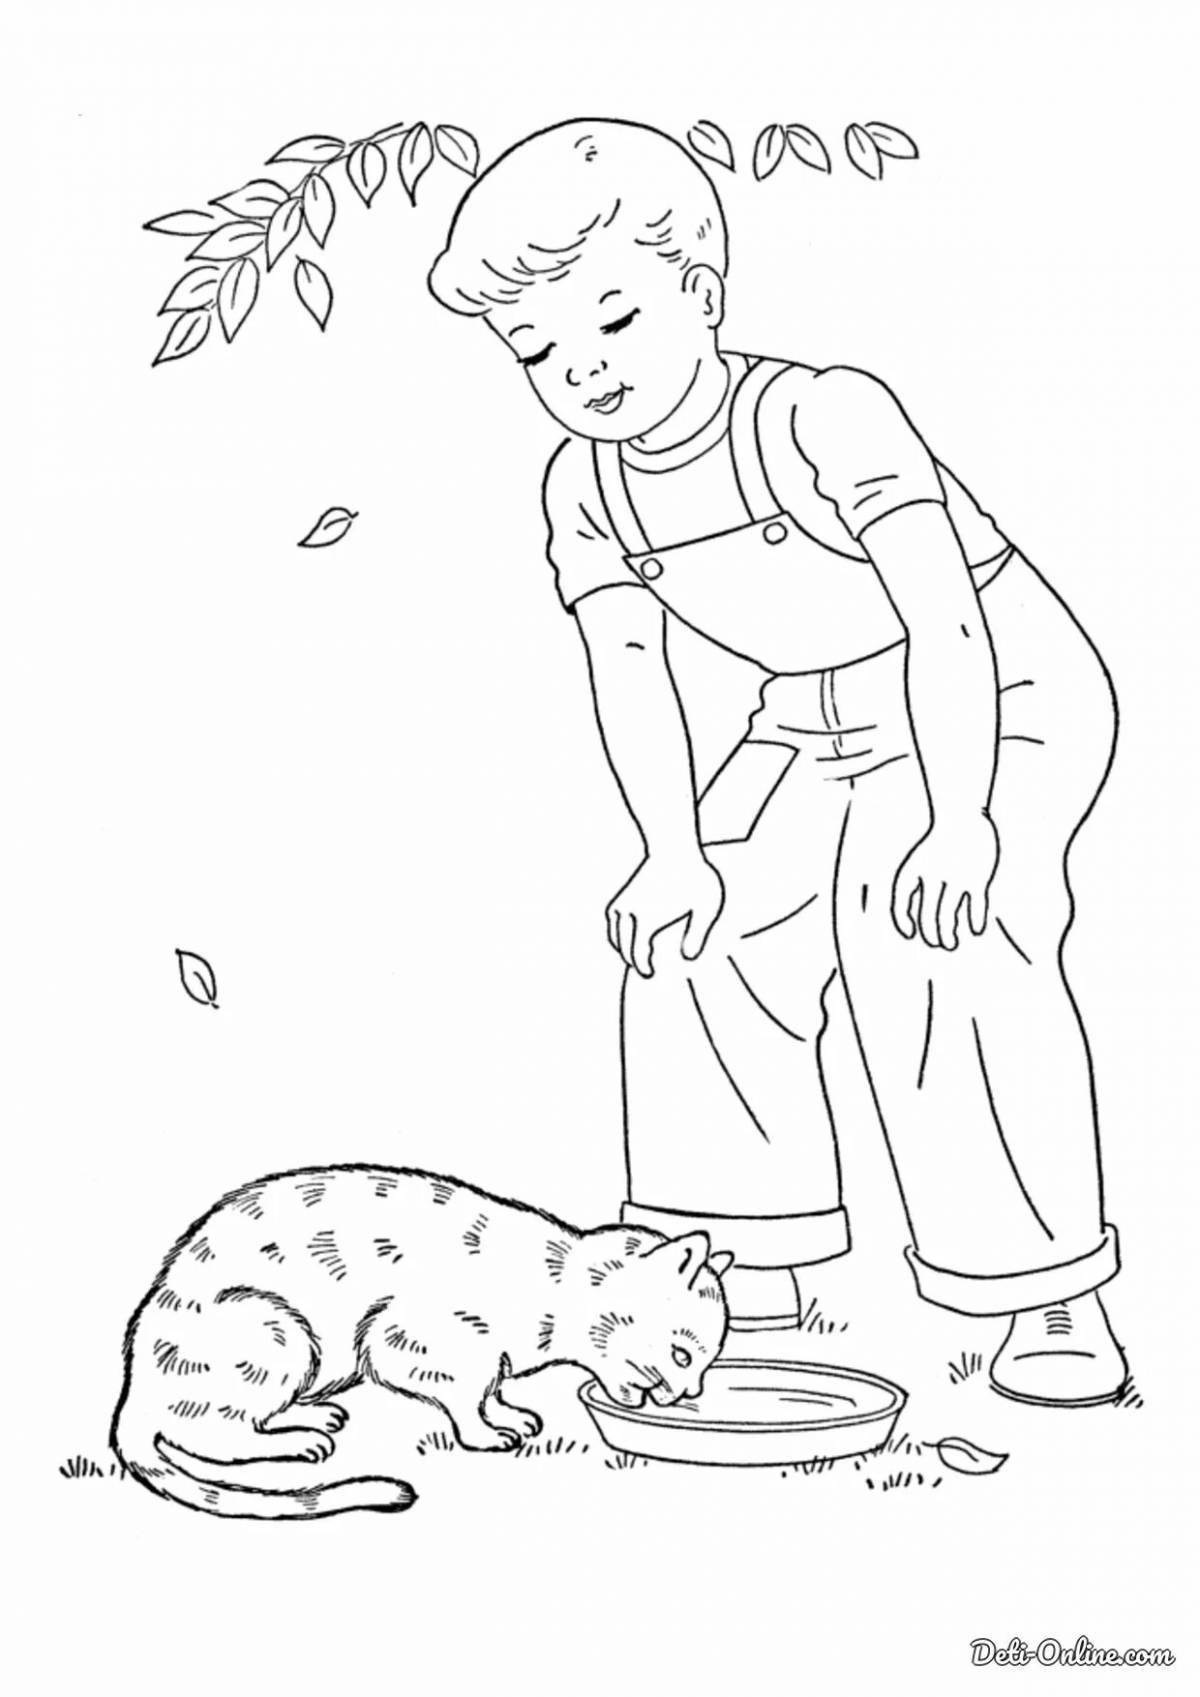 Live care coloring page